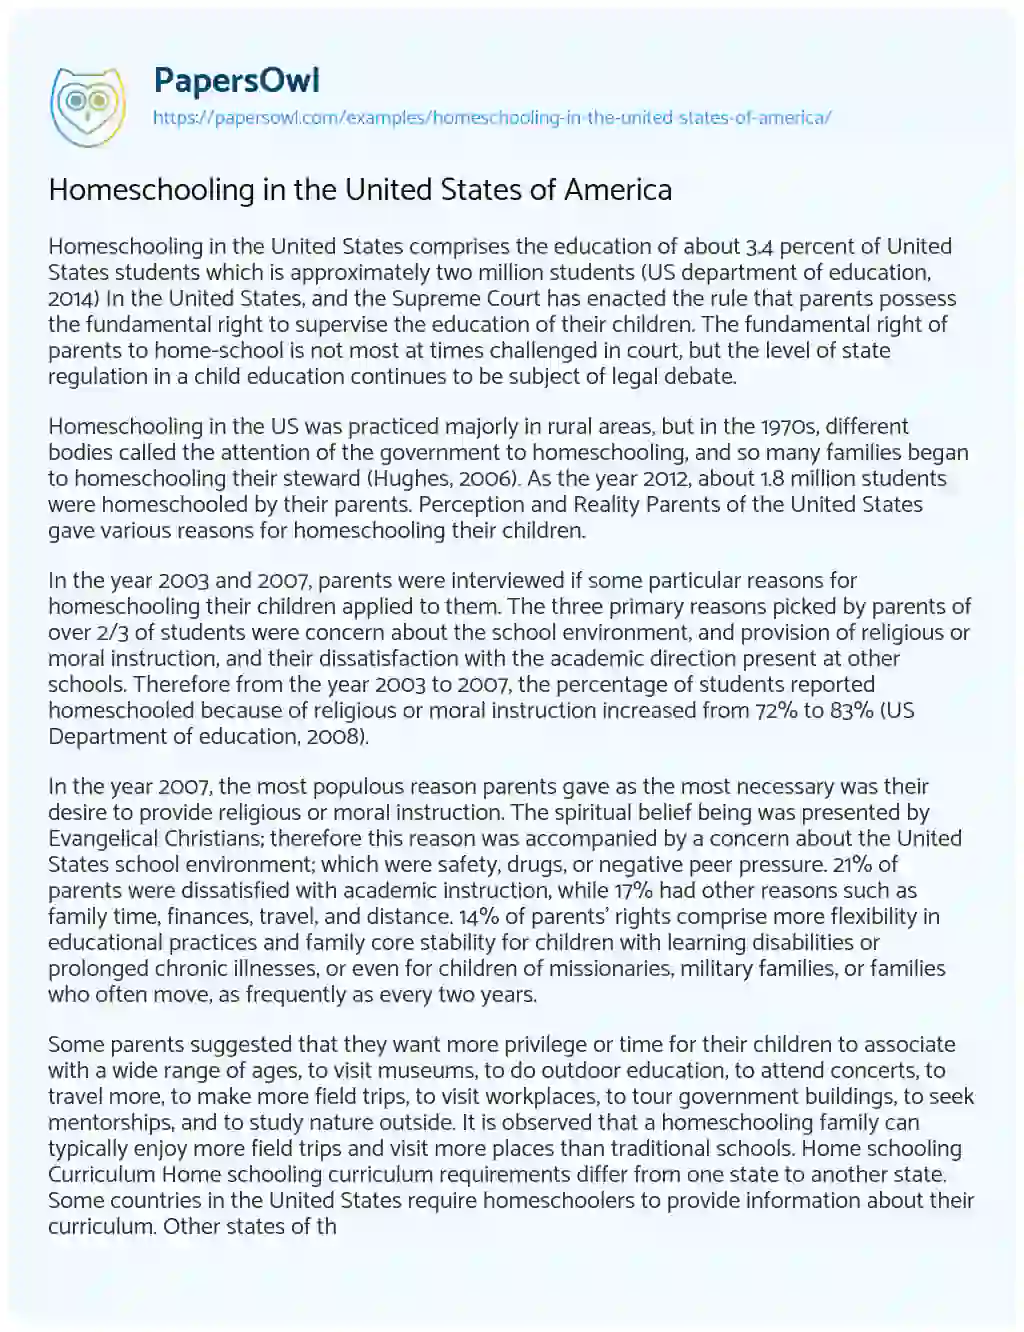 Homeschooling in the United States of America essay